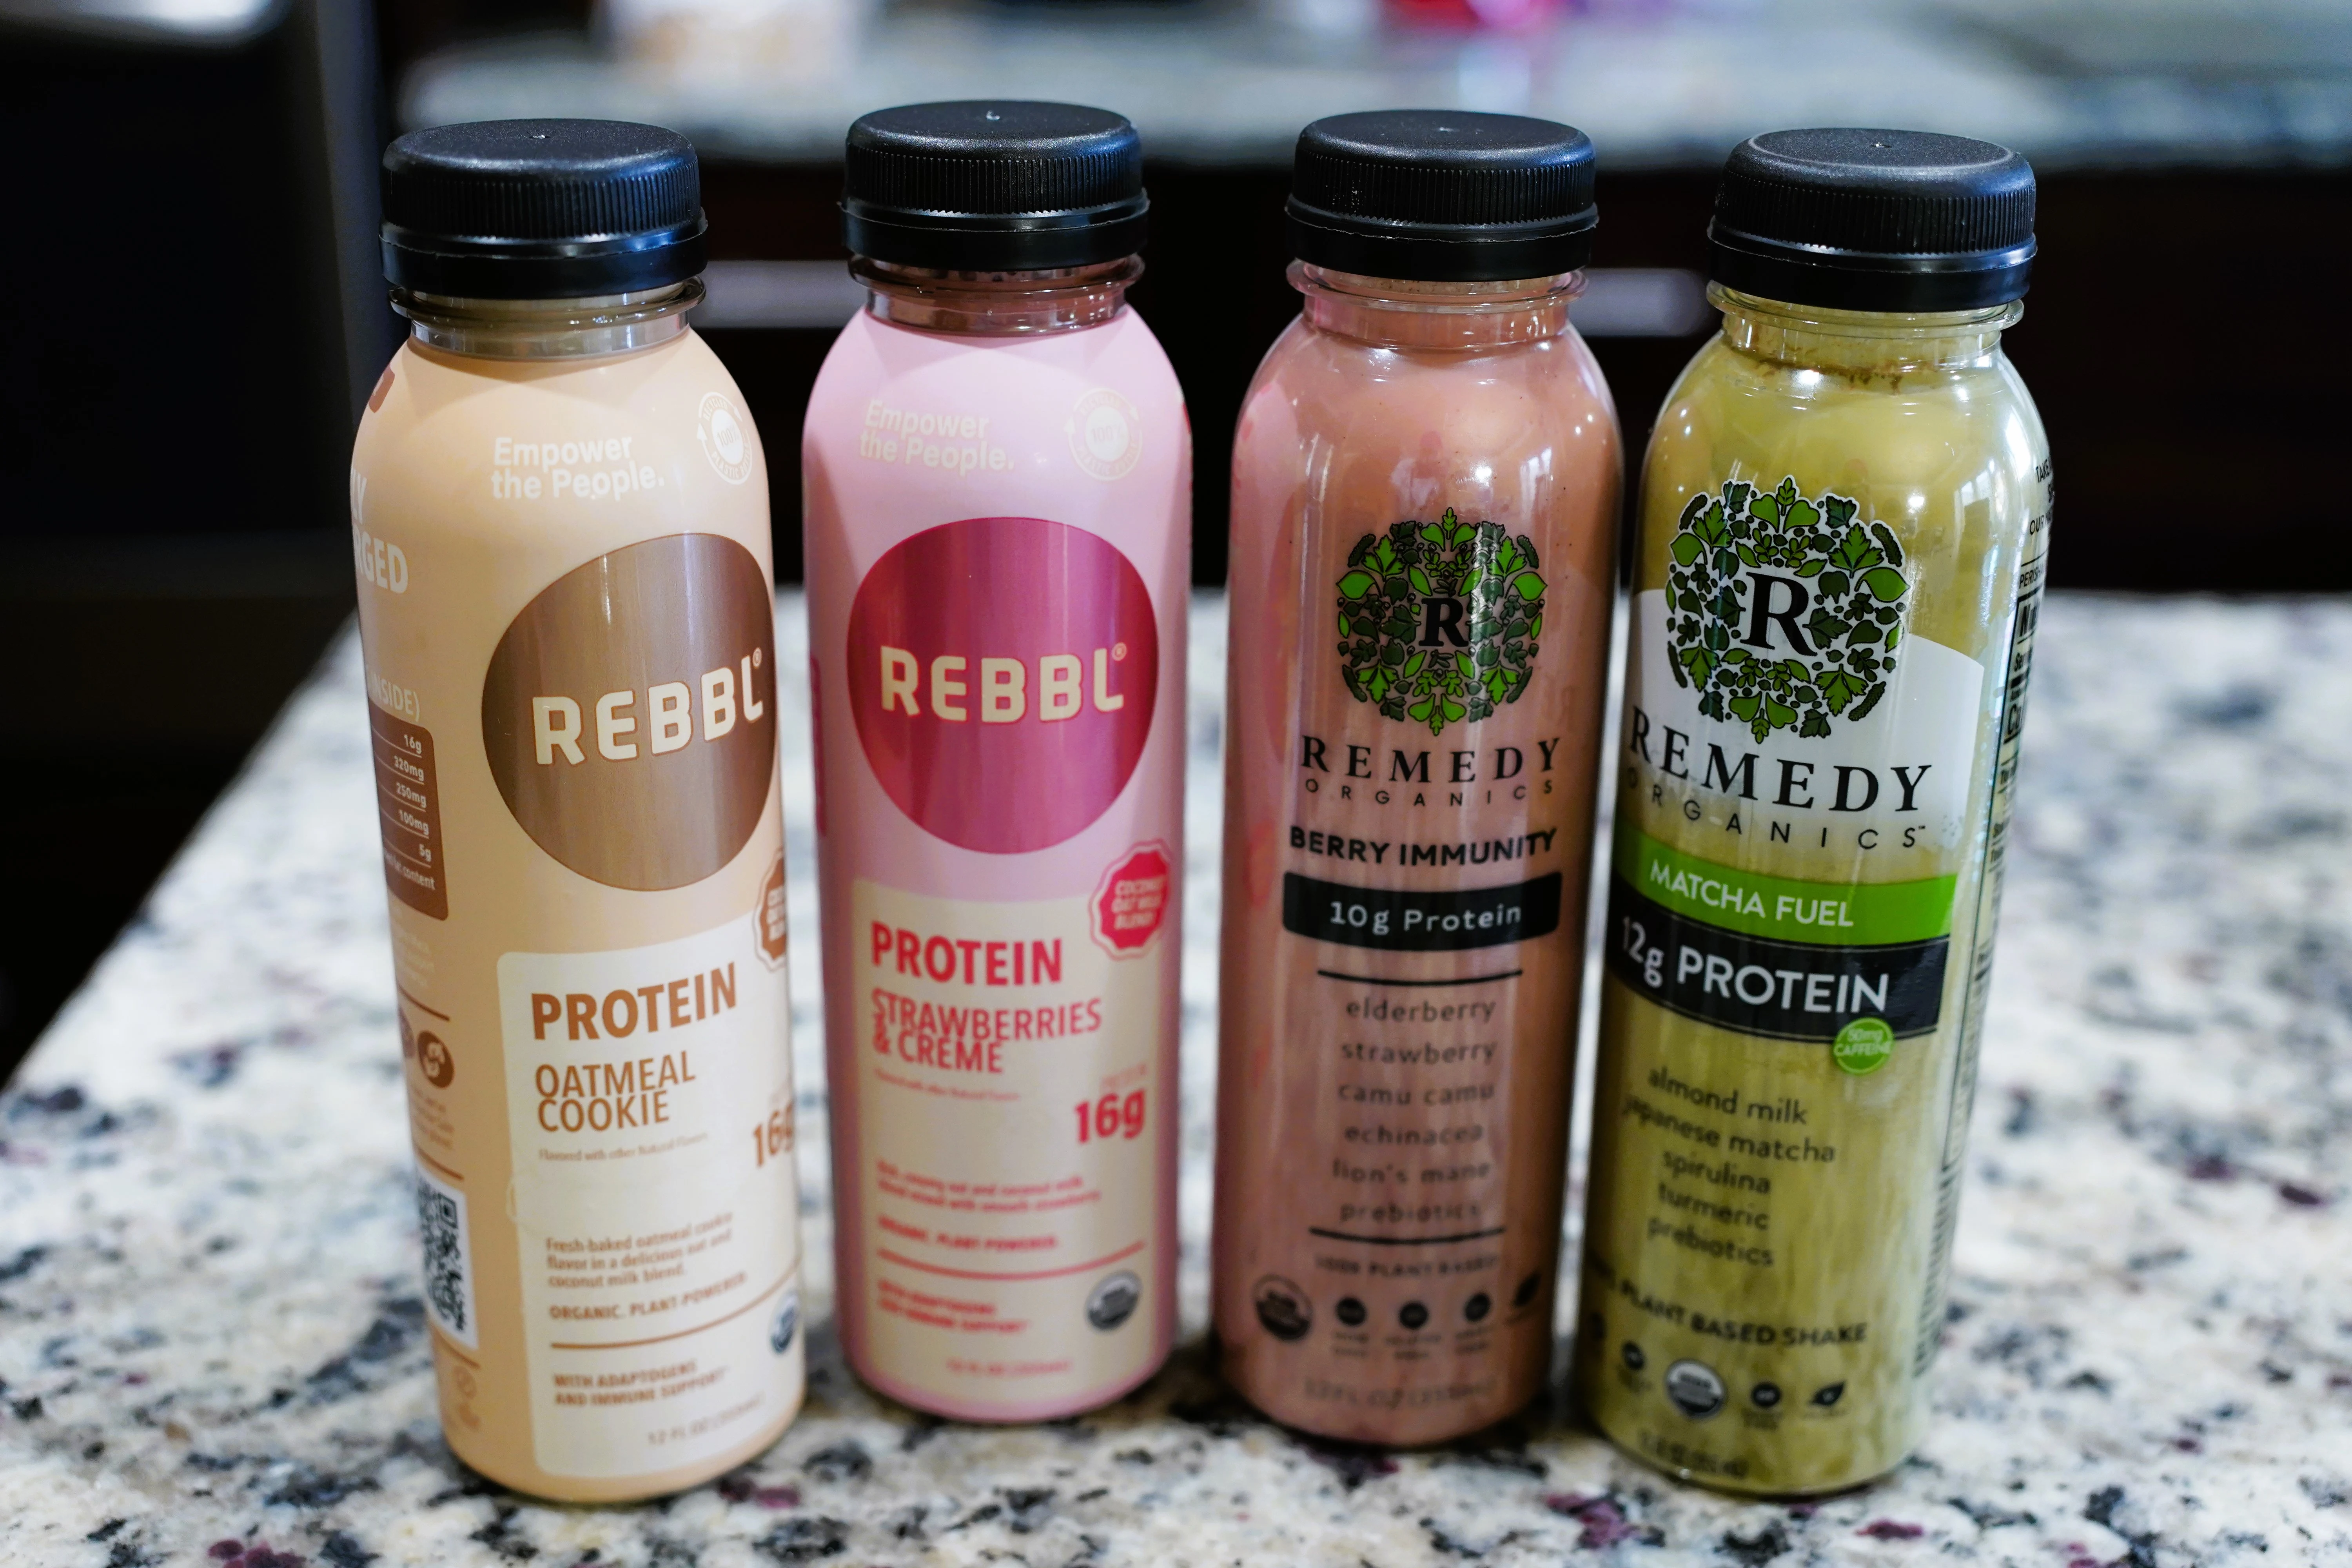 REBBL and Remedy Organics Protein Shakes